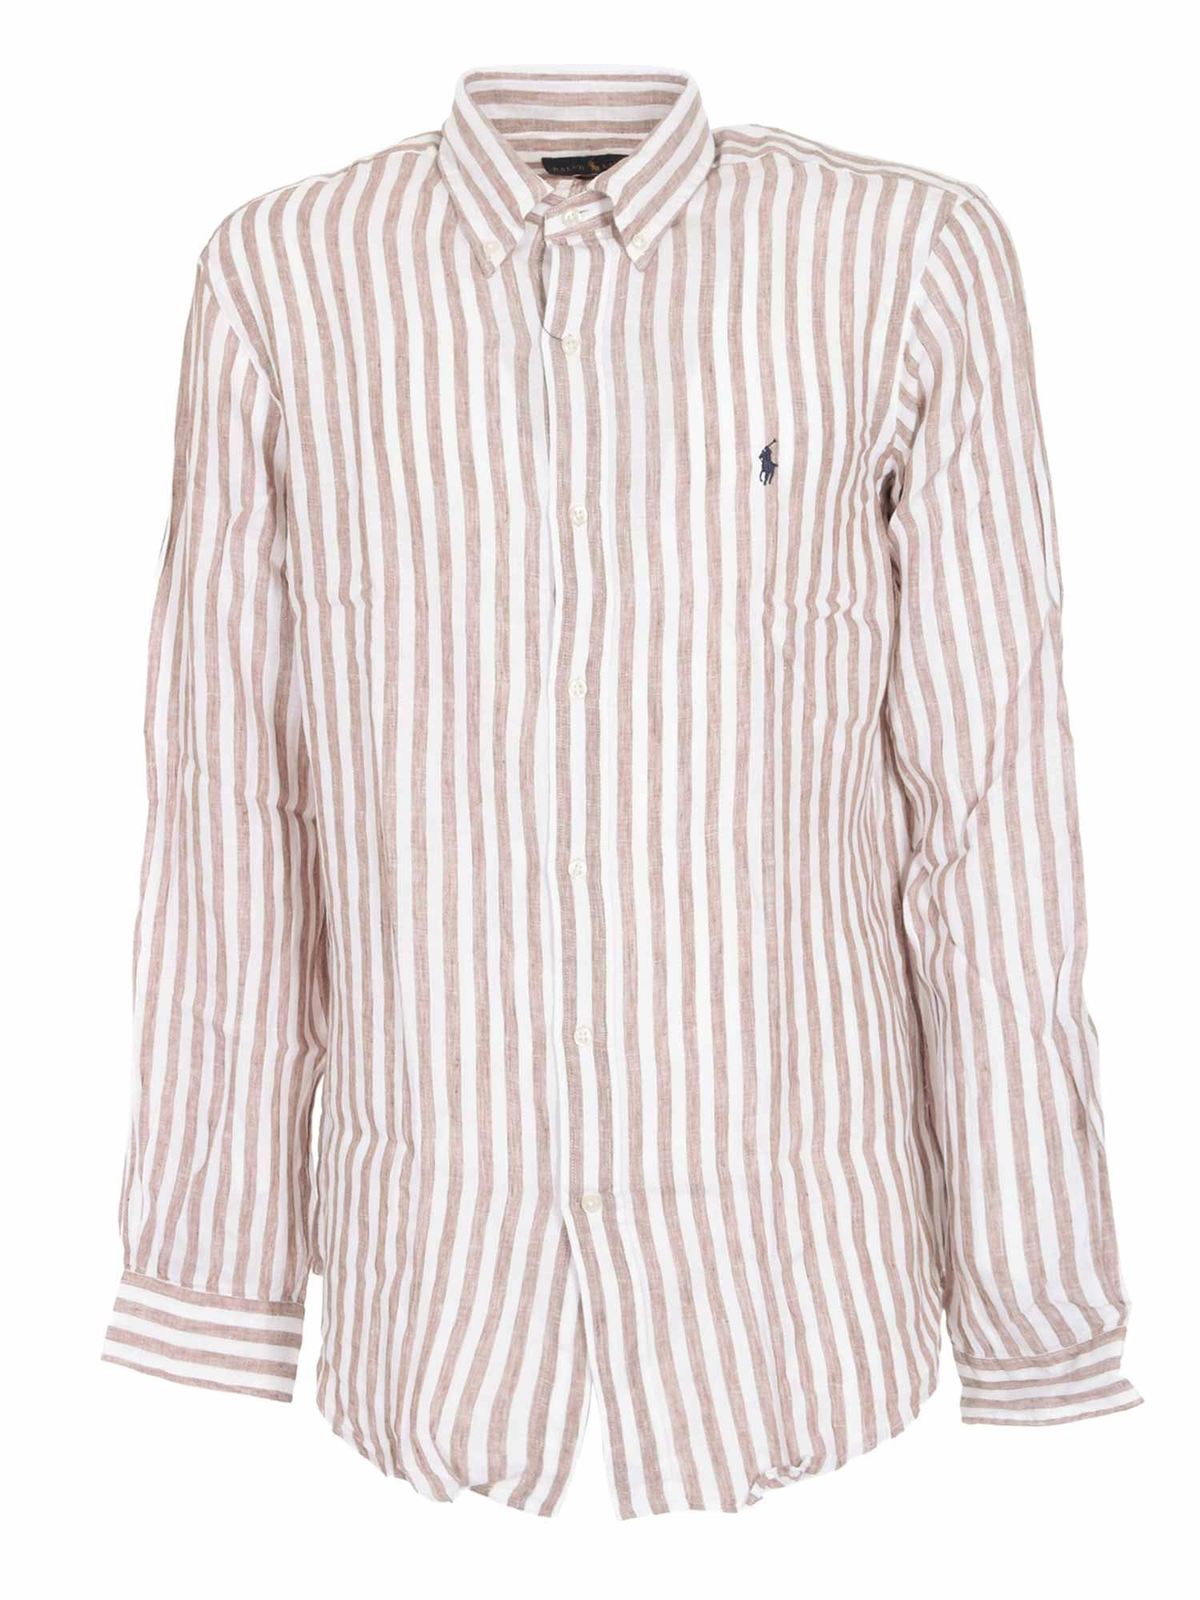 Polo Ralph Lauren Classic Striped Shirt In White And Khaki In Brown